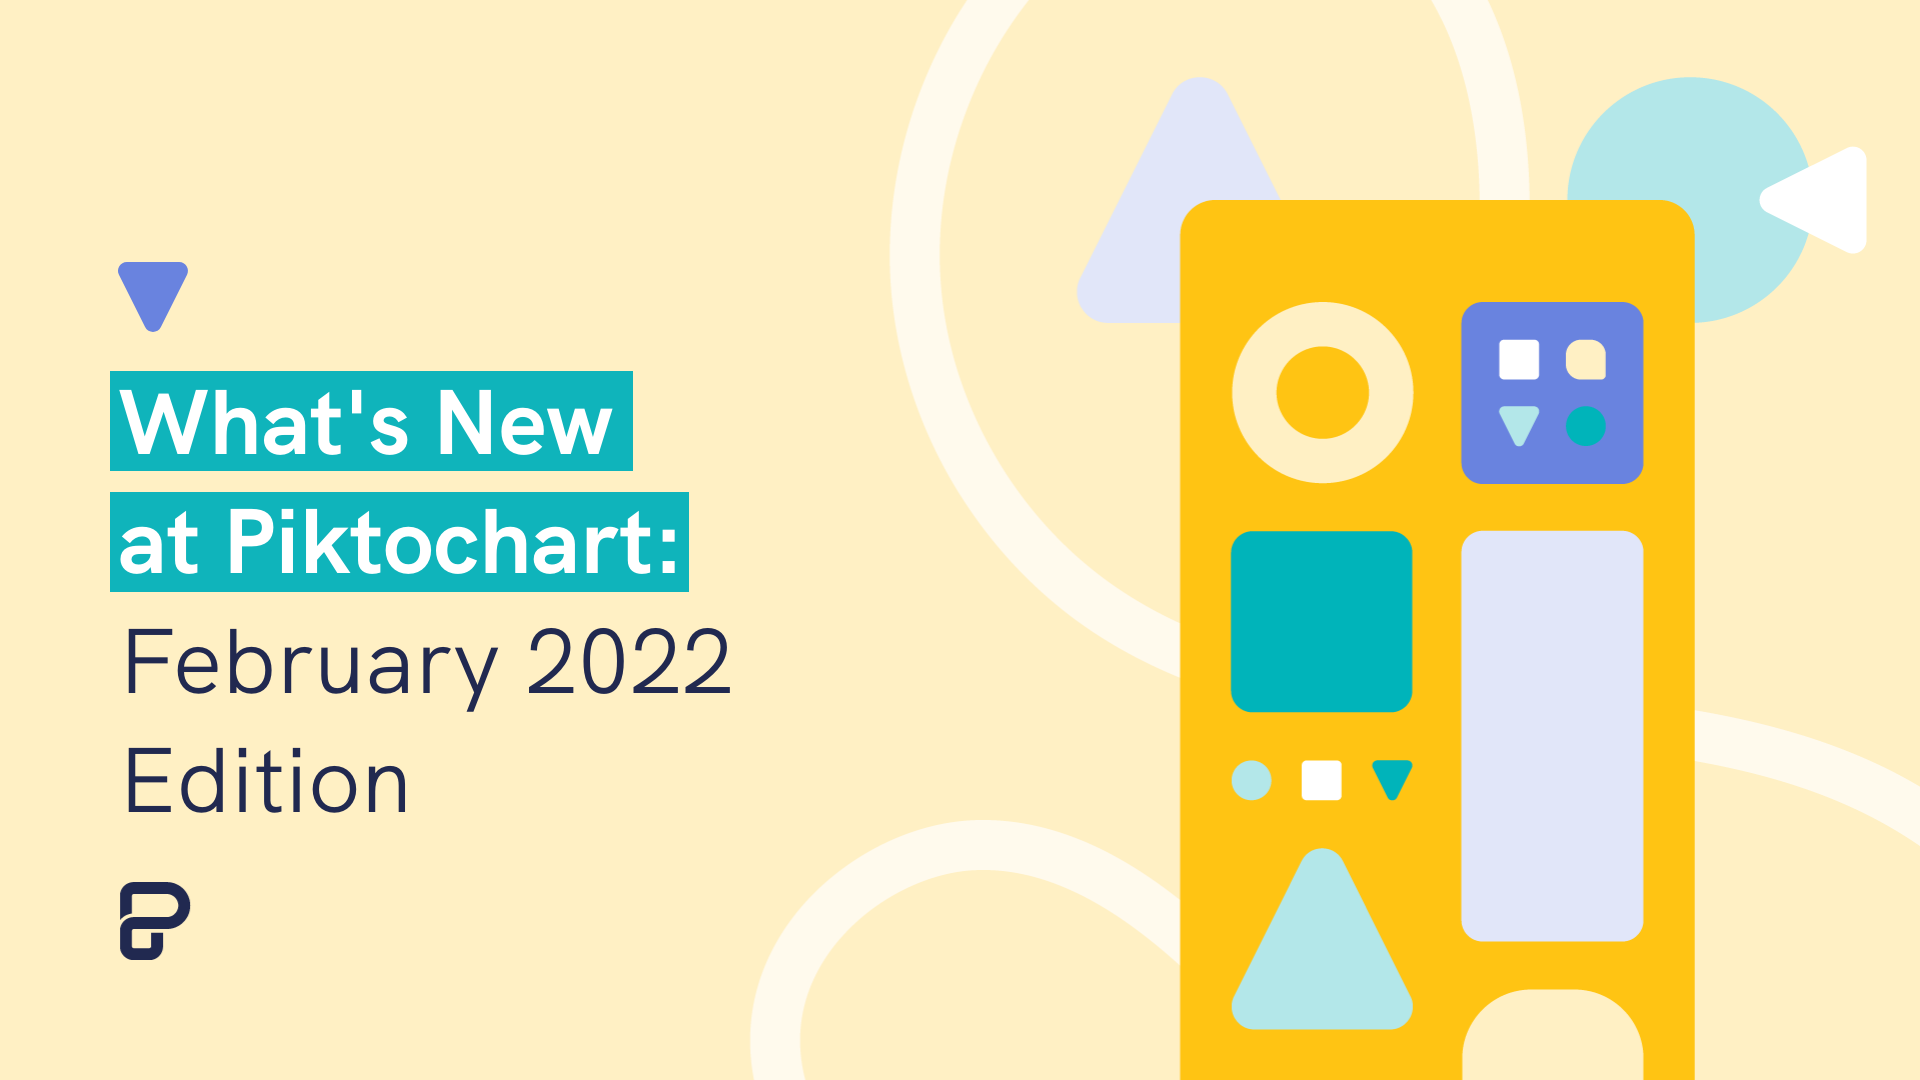 what's new at Piktochart - Feb 2022 edition